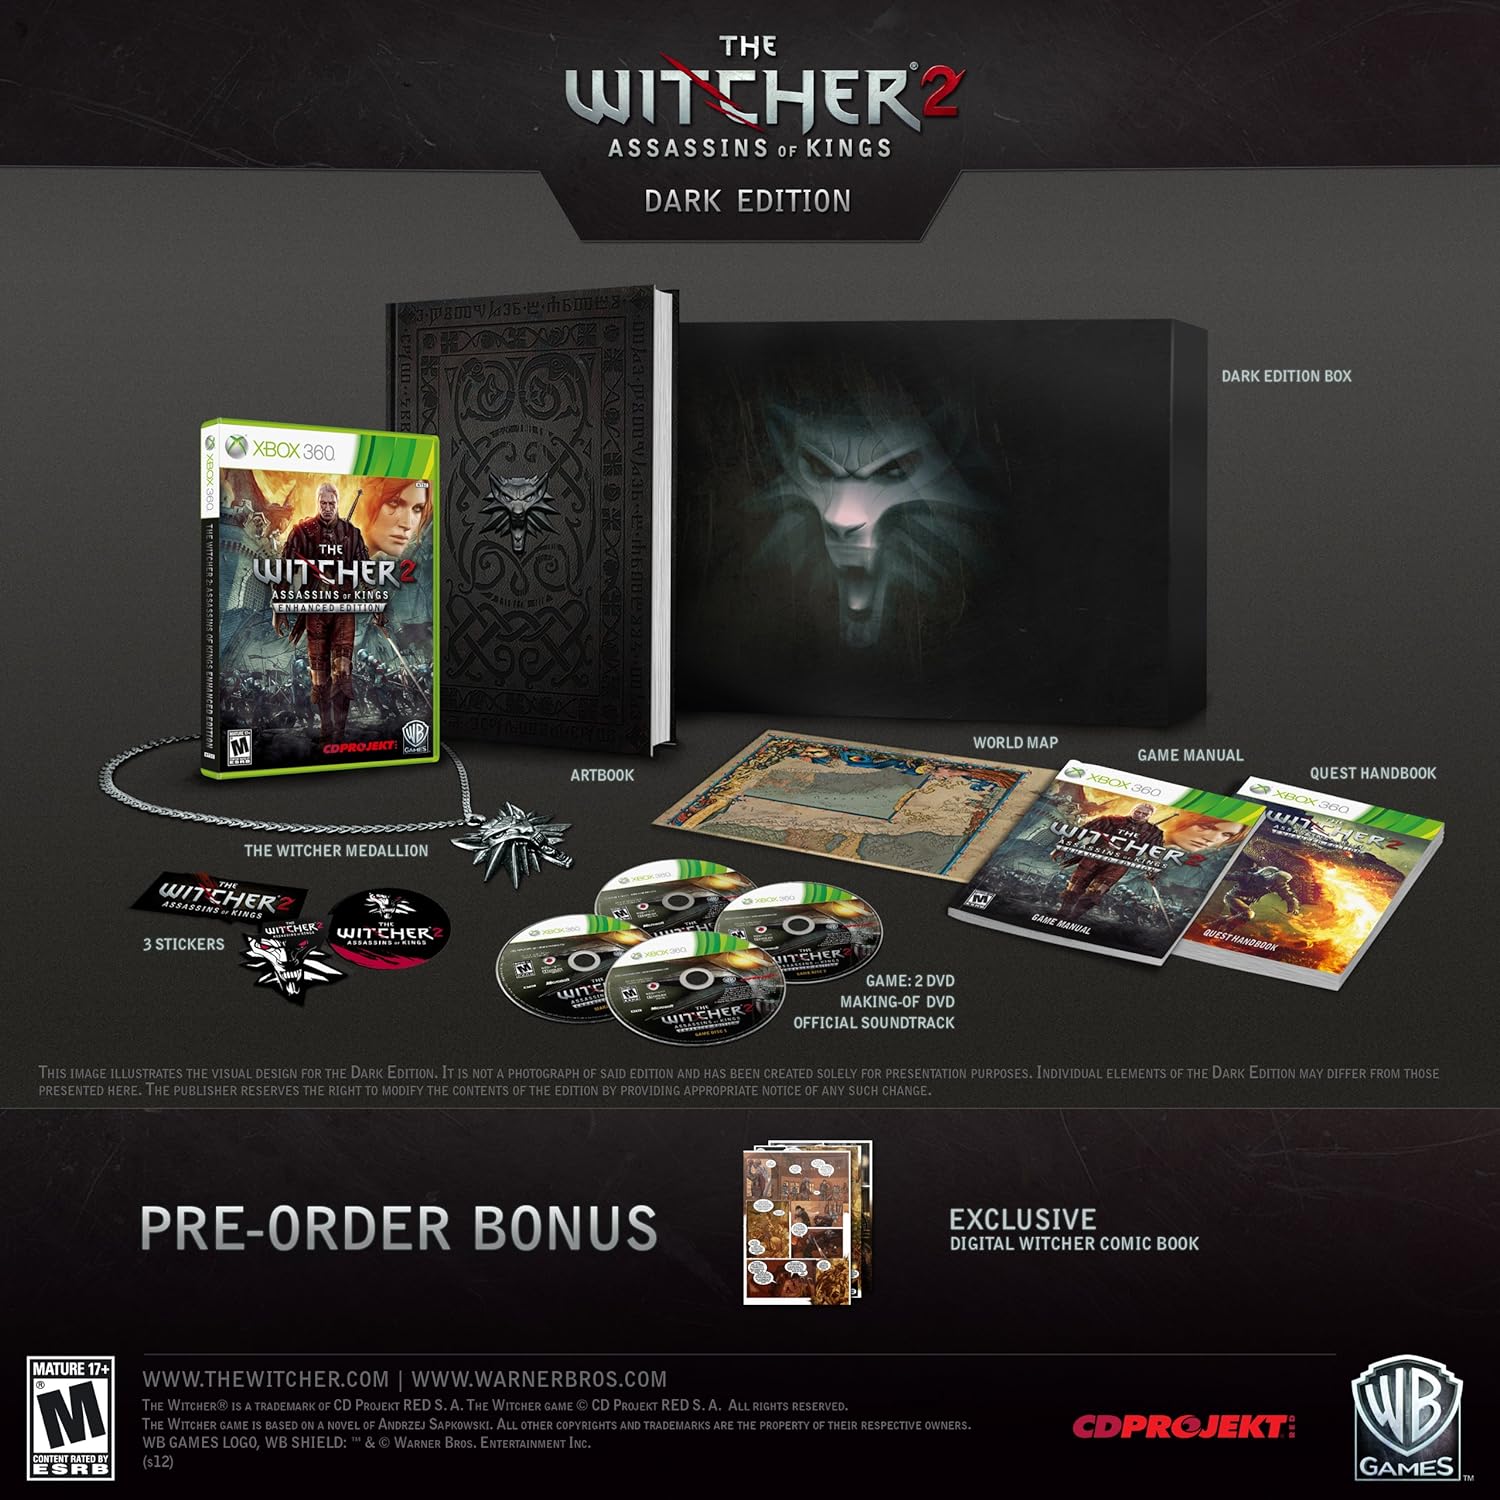 Xbox360 - The Witcher 2: Assassins of Kings Enhanced Edition - Dark Edition